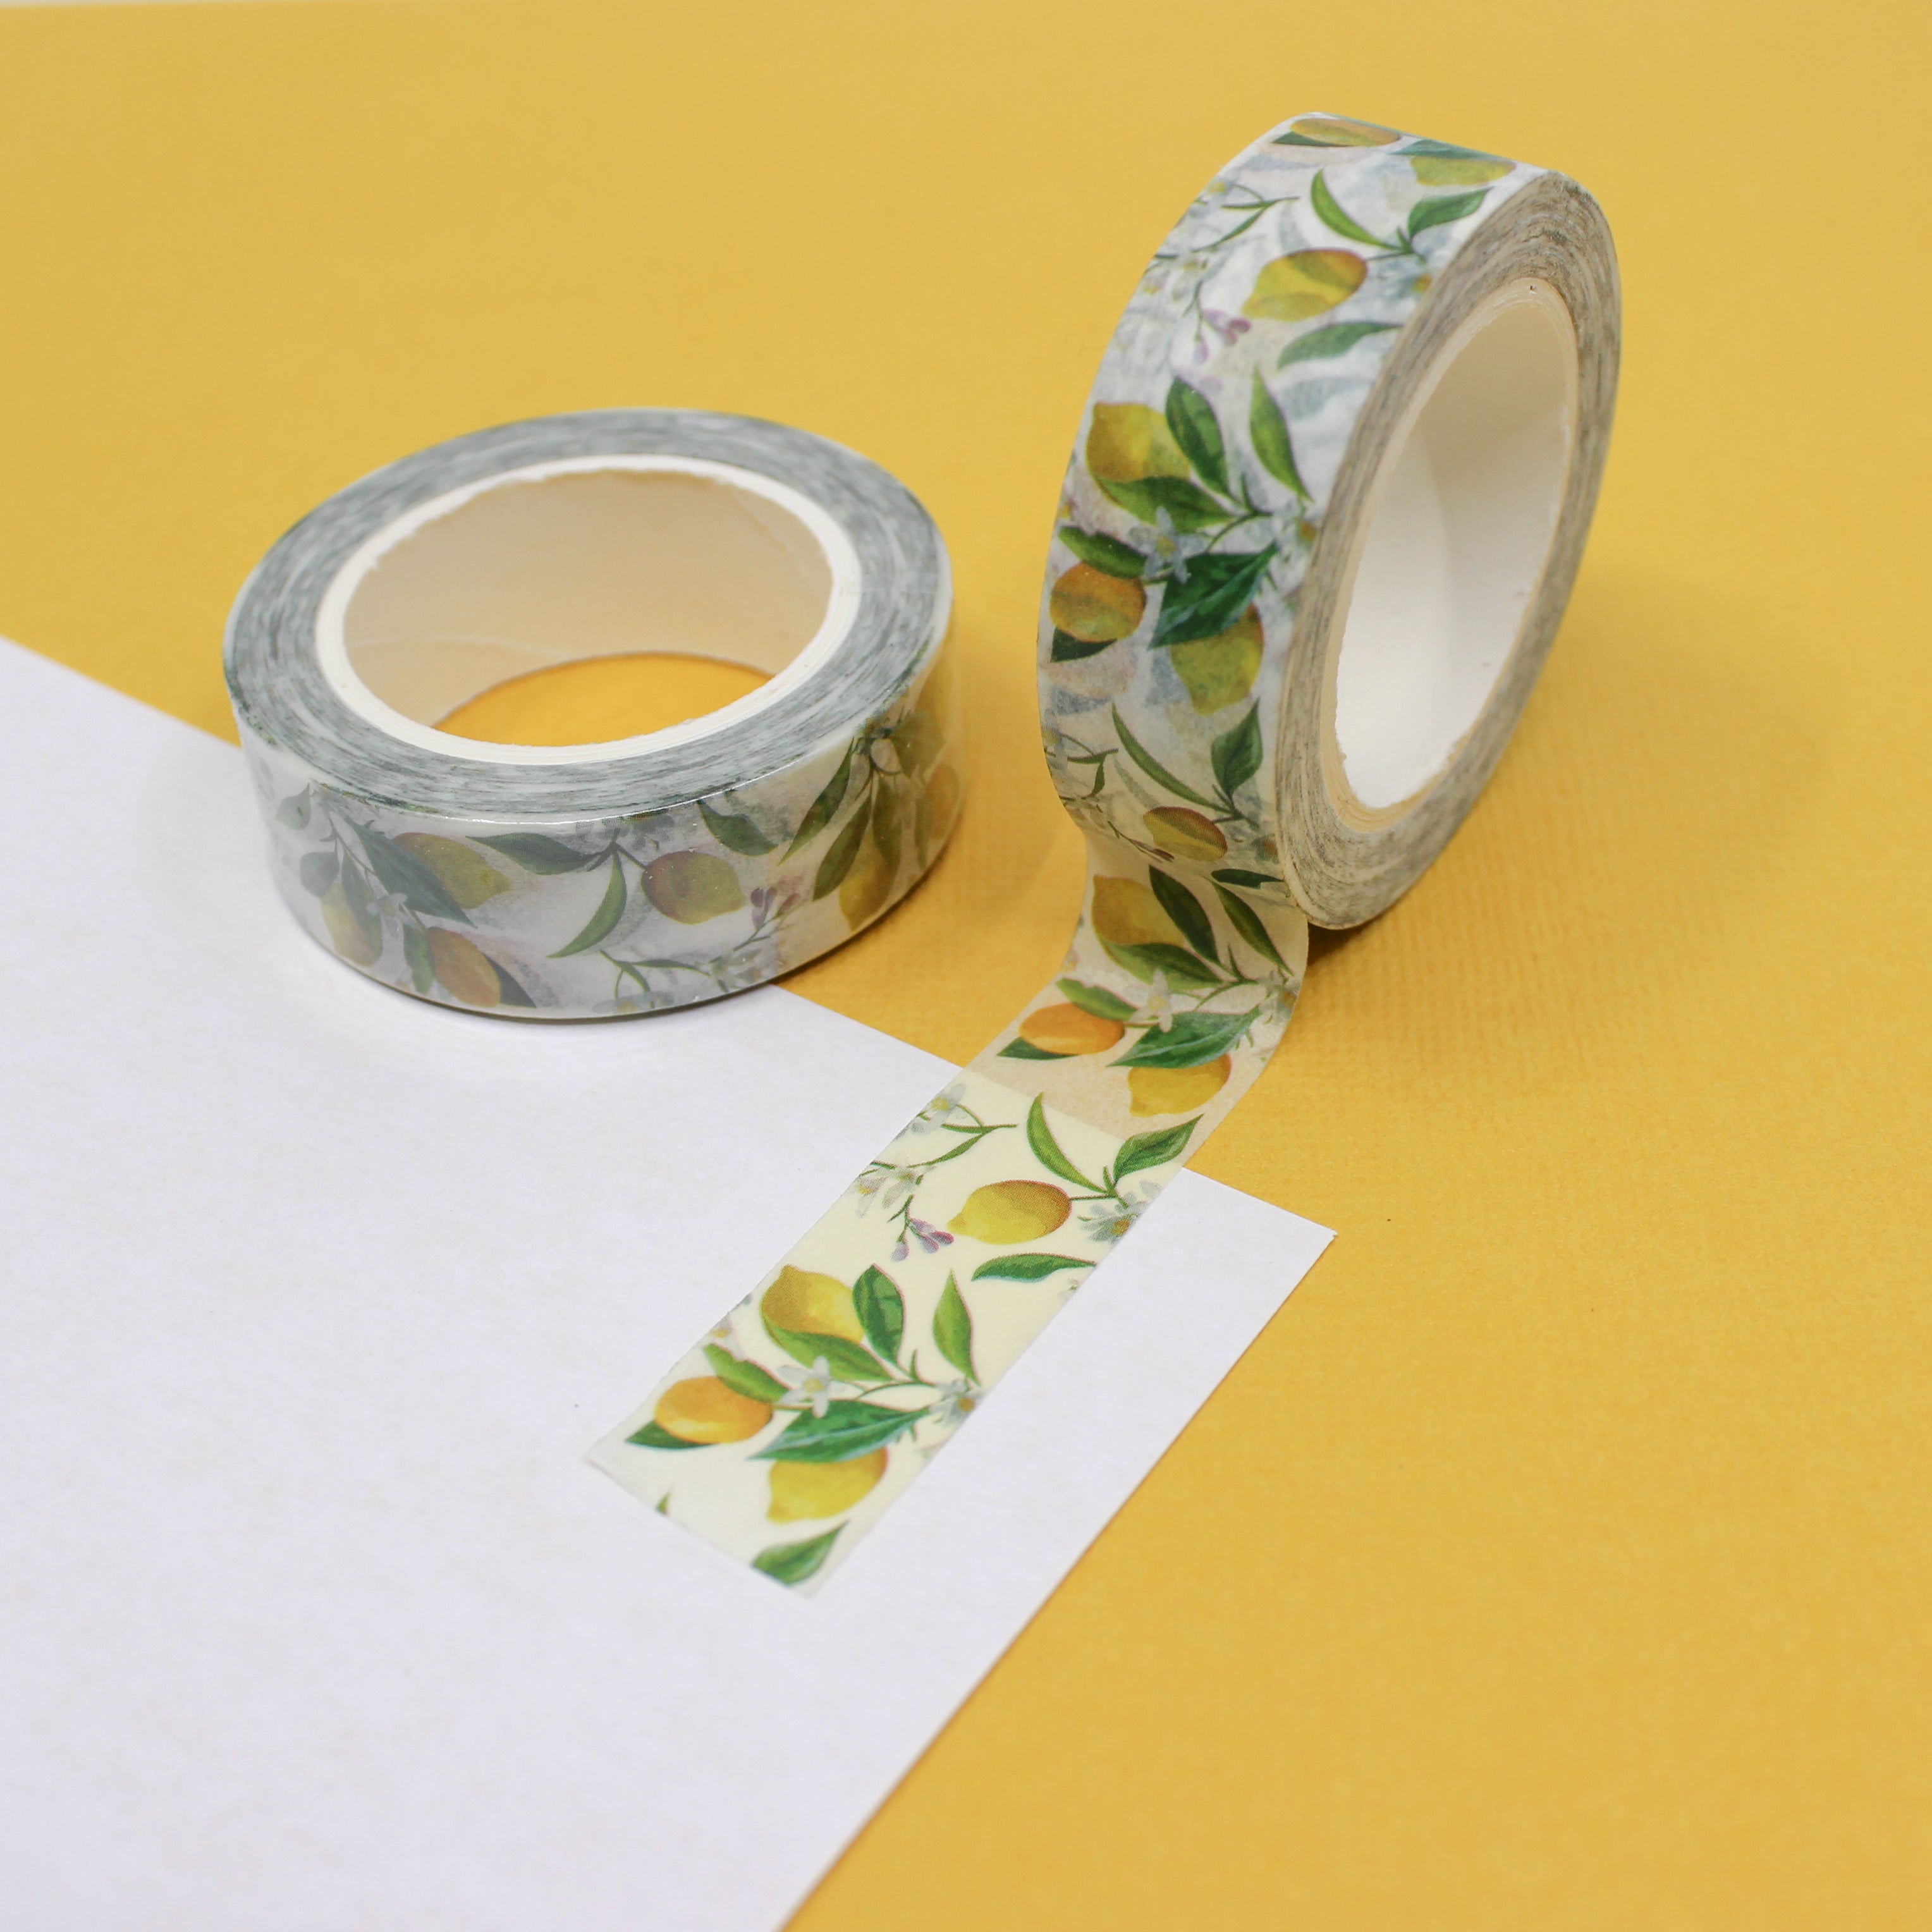 This is a lemon tropical fruit collections pattern washi tape from BBB Supplies Craft Shop